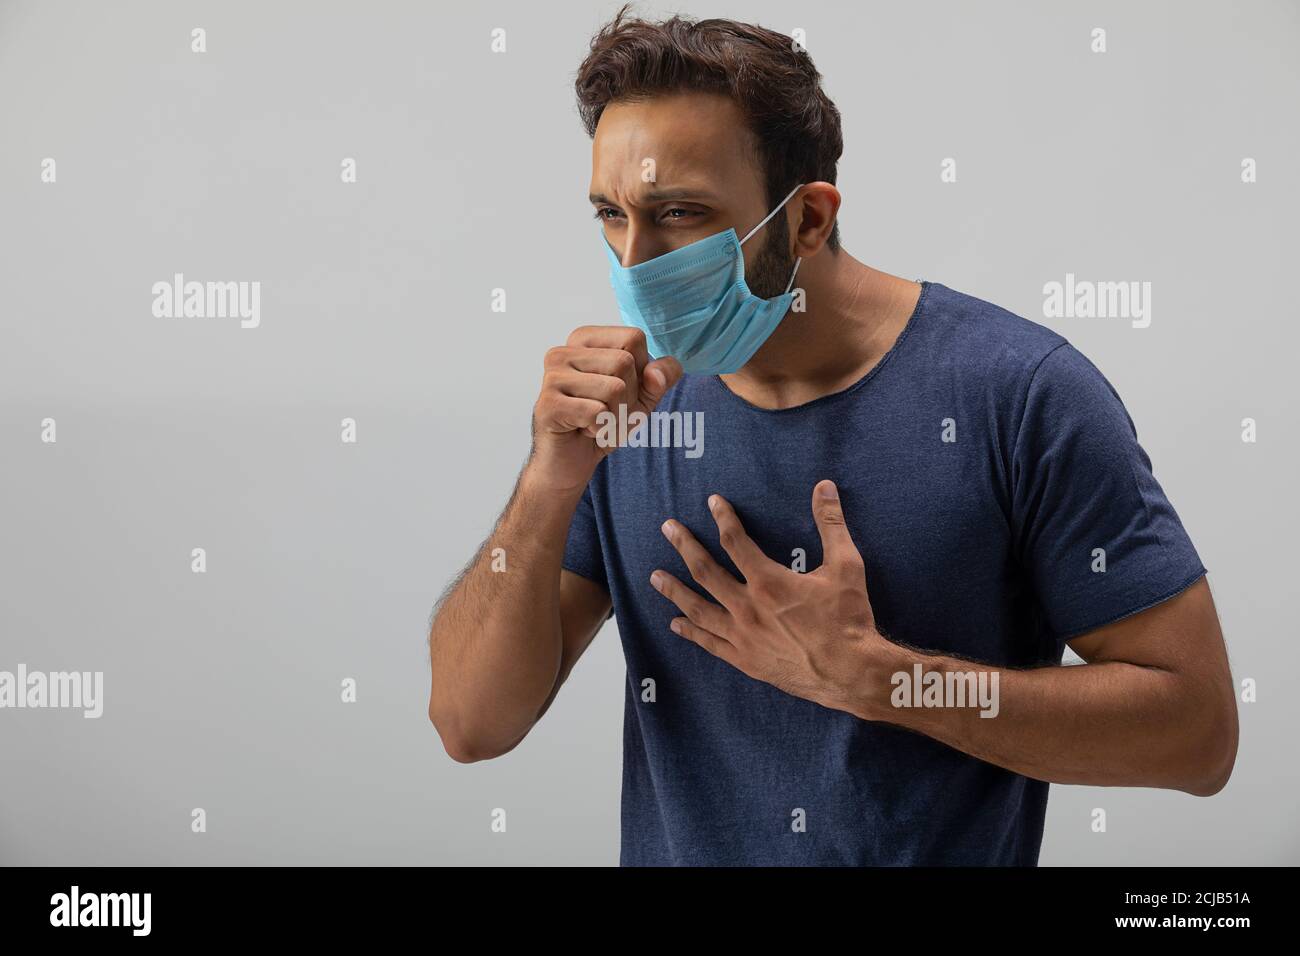 Young man coughing wearing a mask with his hand on chest Stock Photo